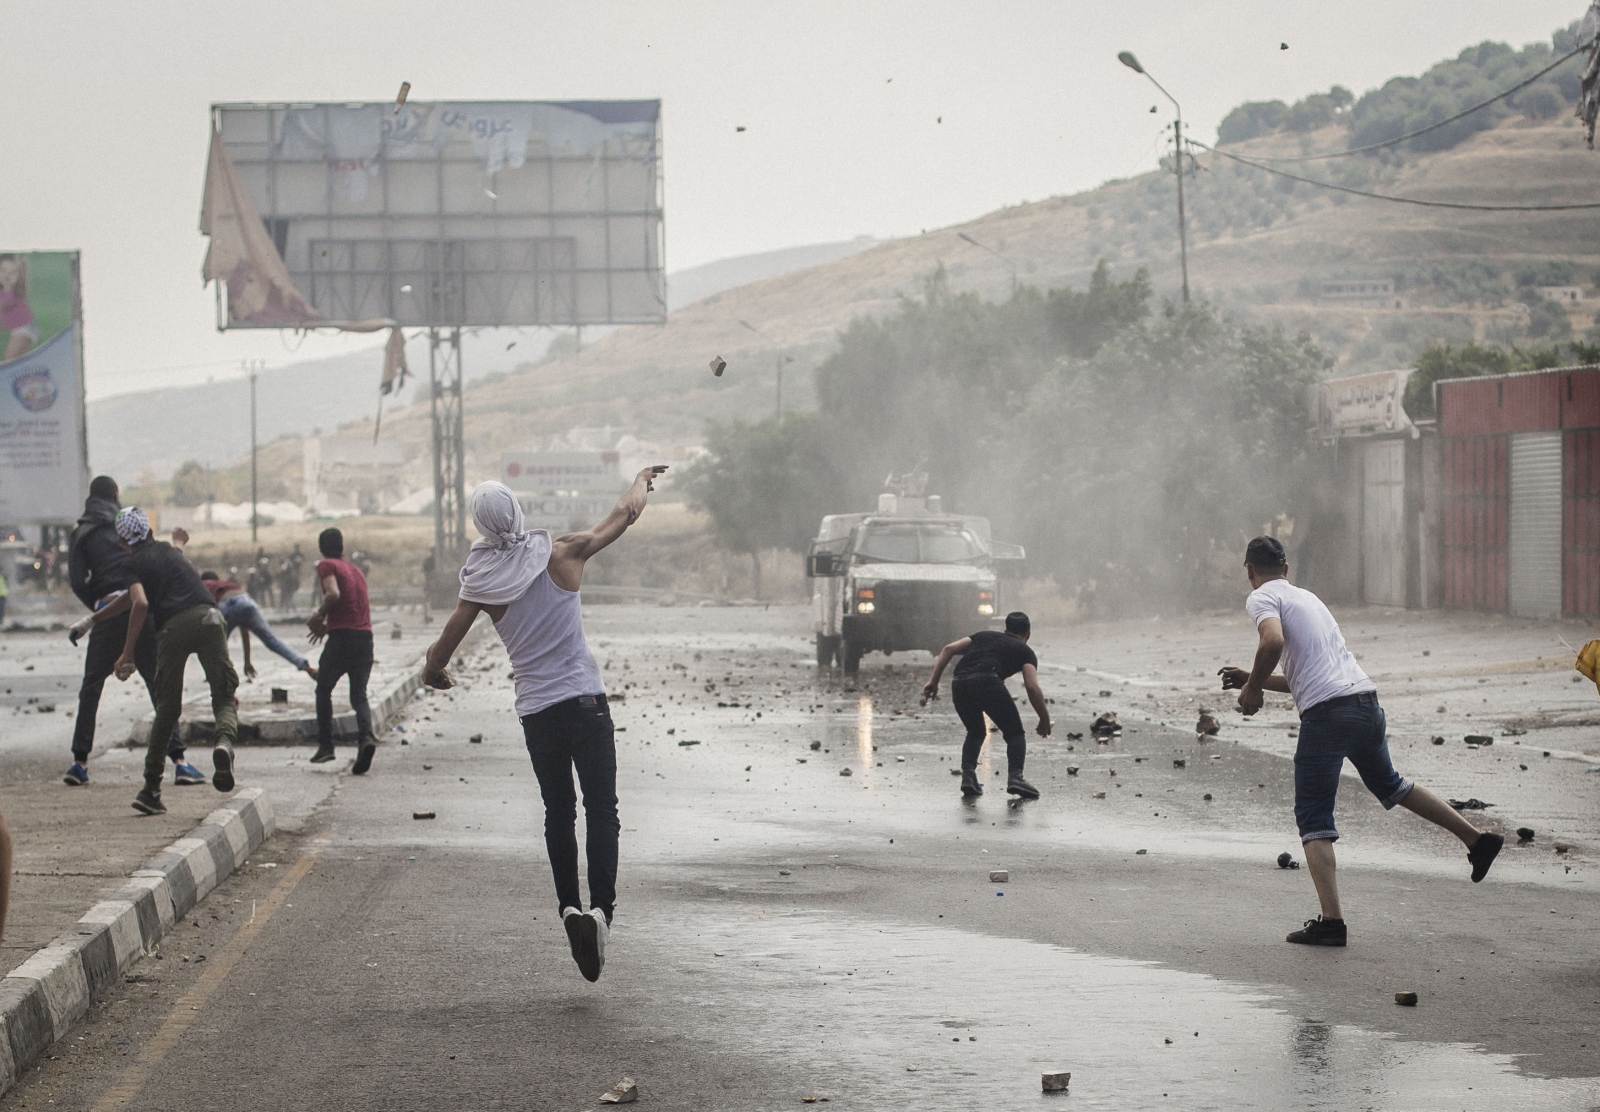 Image from Clashes in Occupied West Bank